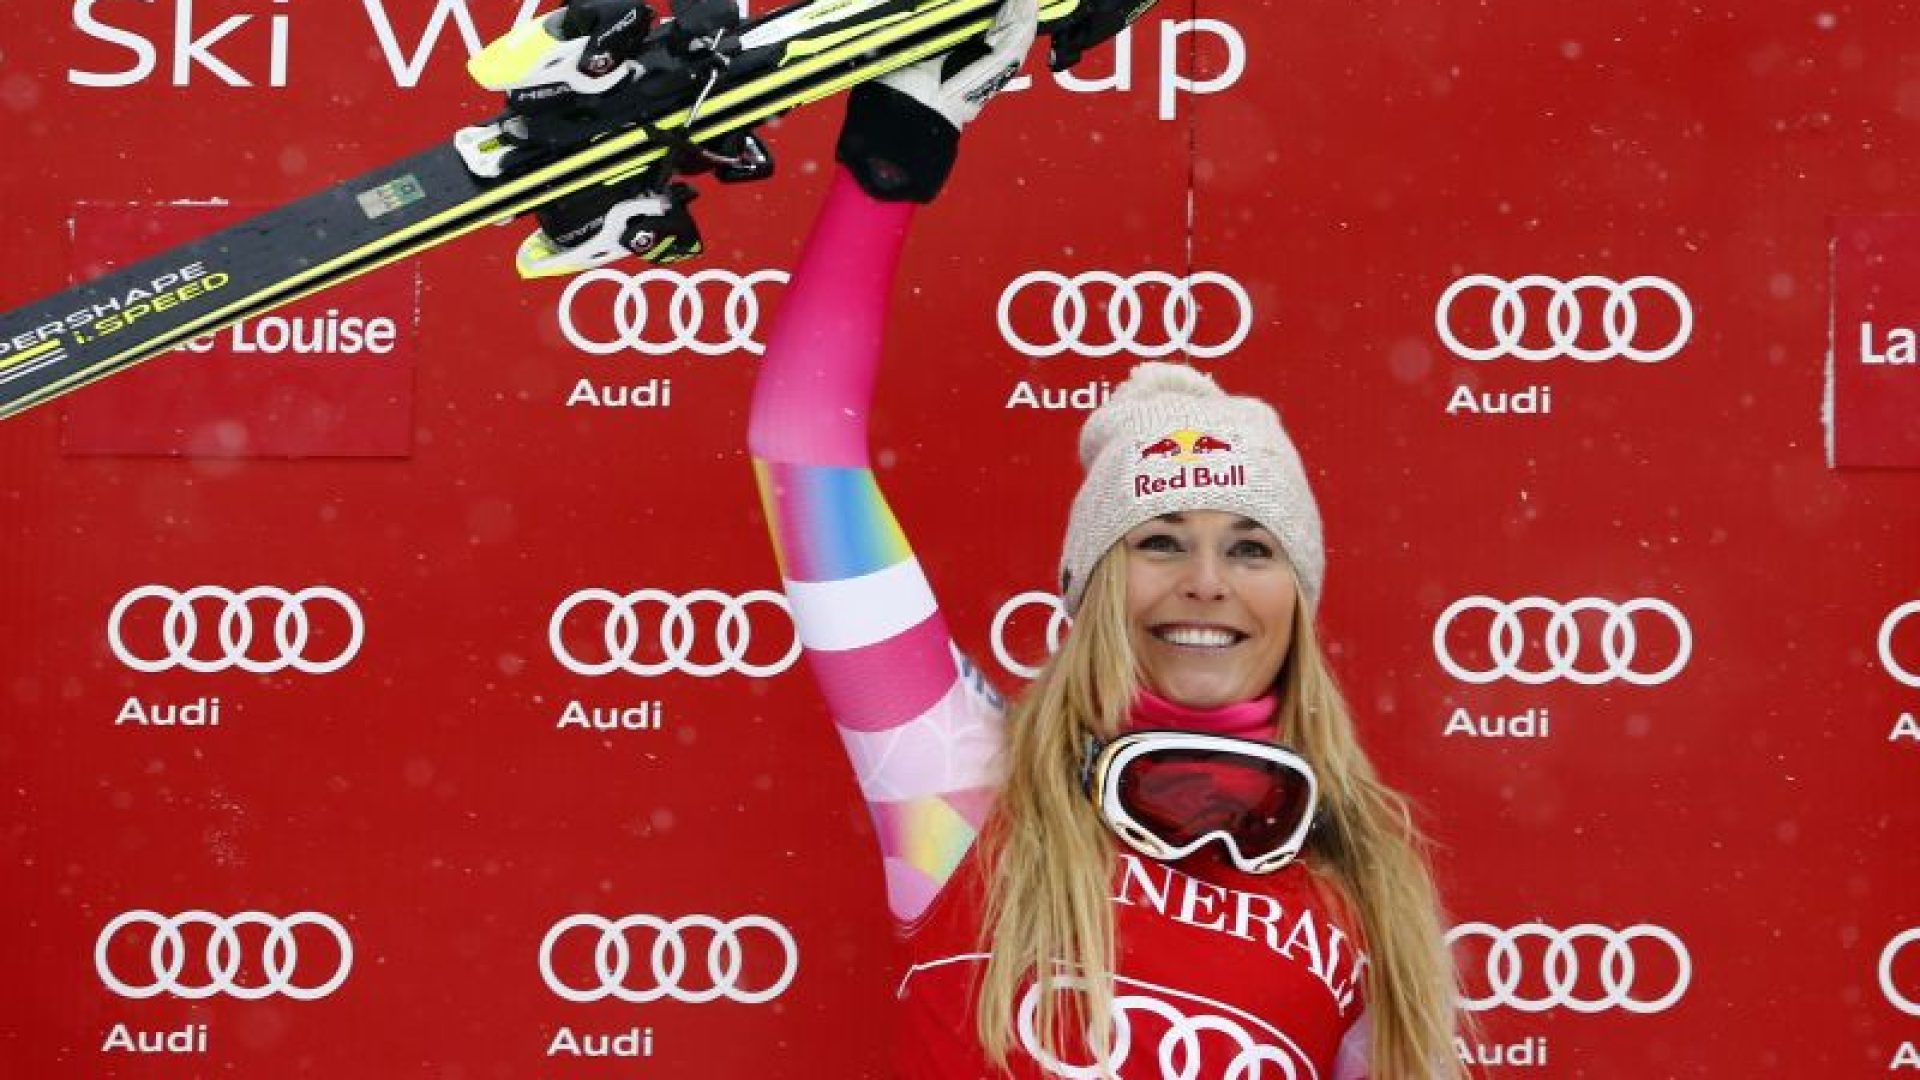 lindsey-wins-dh-in-lake-louise-4